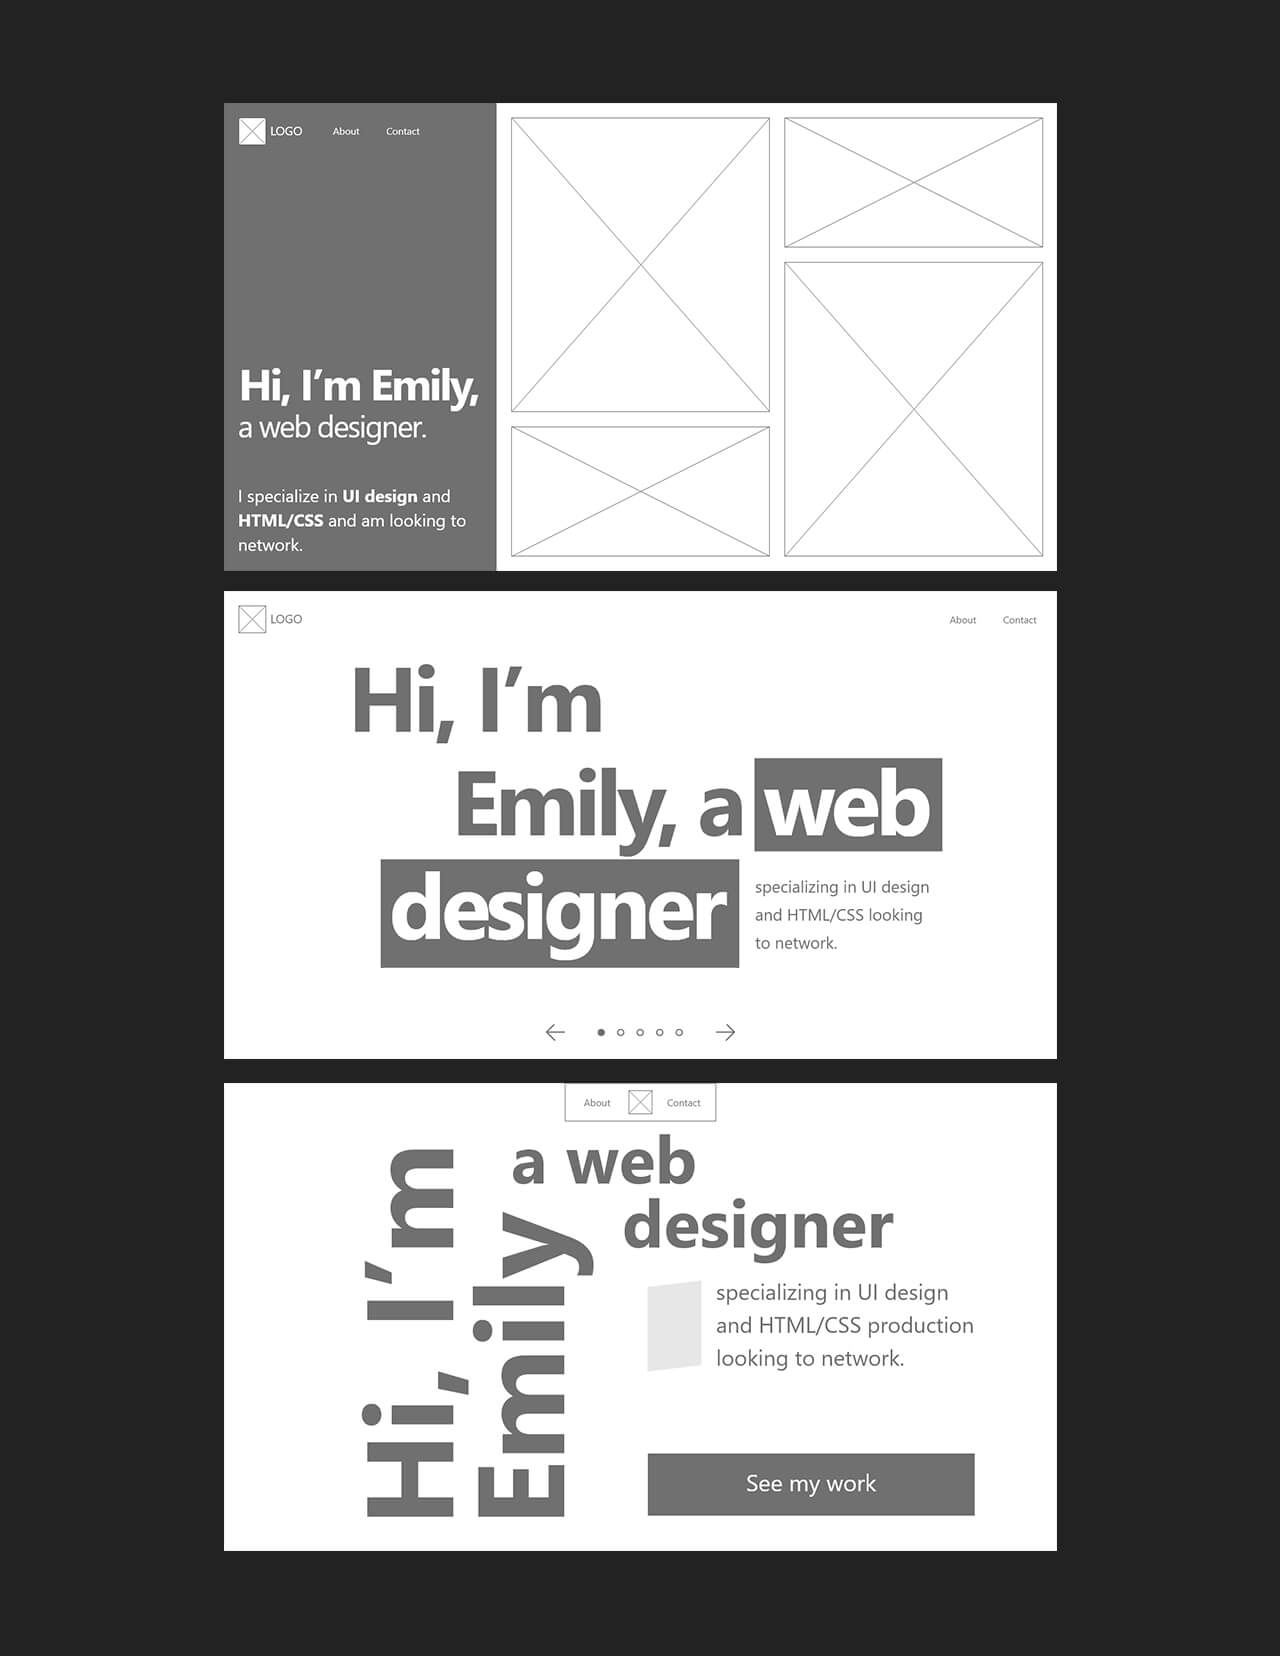 Three wireframe variations of the home page, which shows my name, profession, and links to my project work. The first dedicates a lot of space on the right side of the screen for projects, the second uses a carousel to show work, and the last has a button to take you to another page to view the work.